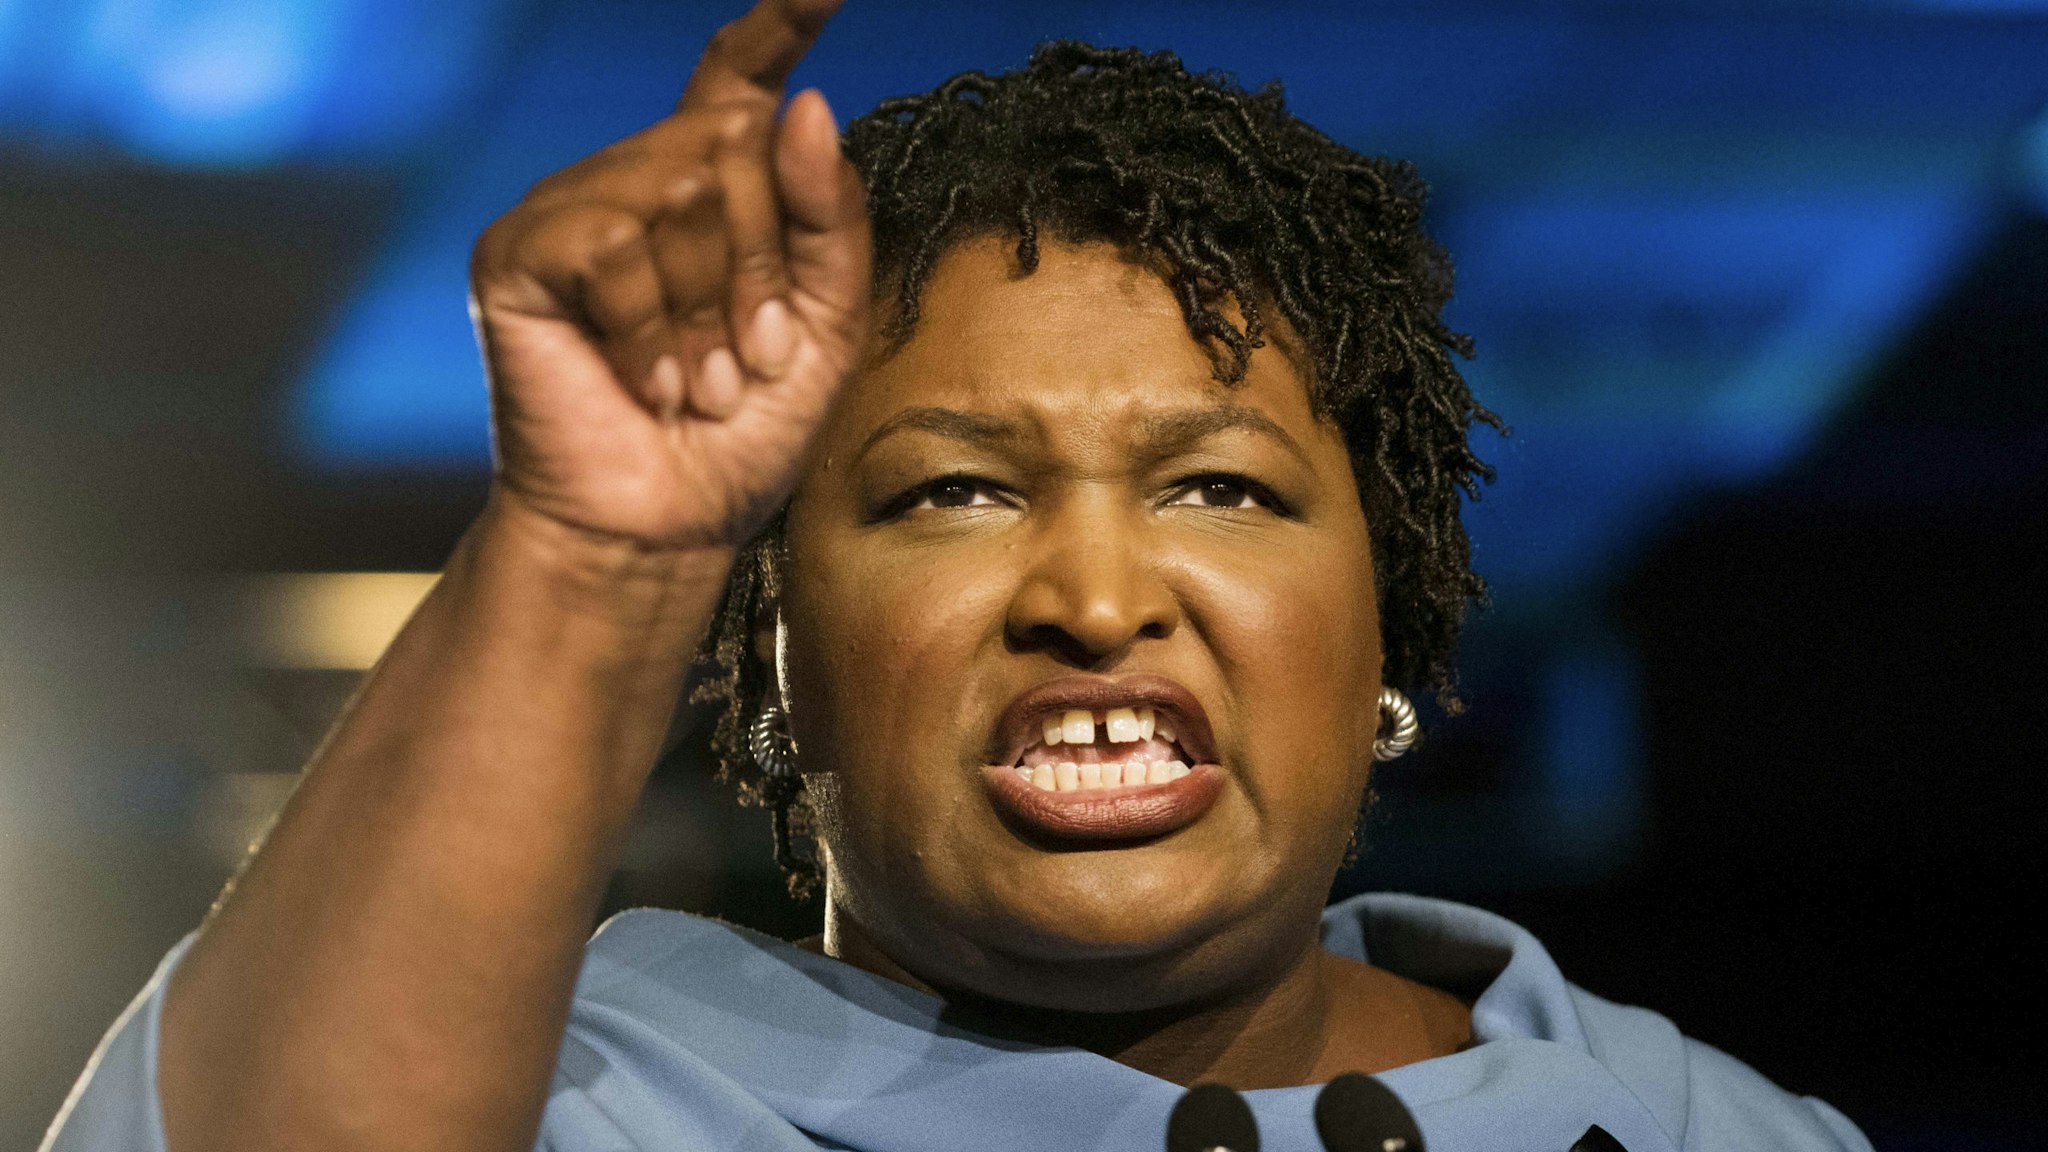 ATLANTA, GEORGIA - On a late election night Democratic nominee for Governor Stacey Abrams speaks to cheering supporters and announced that she'll be in in a runoff with her opponent, at the Hyatt Regency in Atlanta, Georgia on Tuesday November 6, 2018.